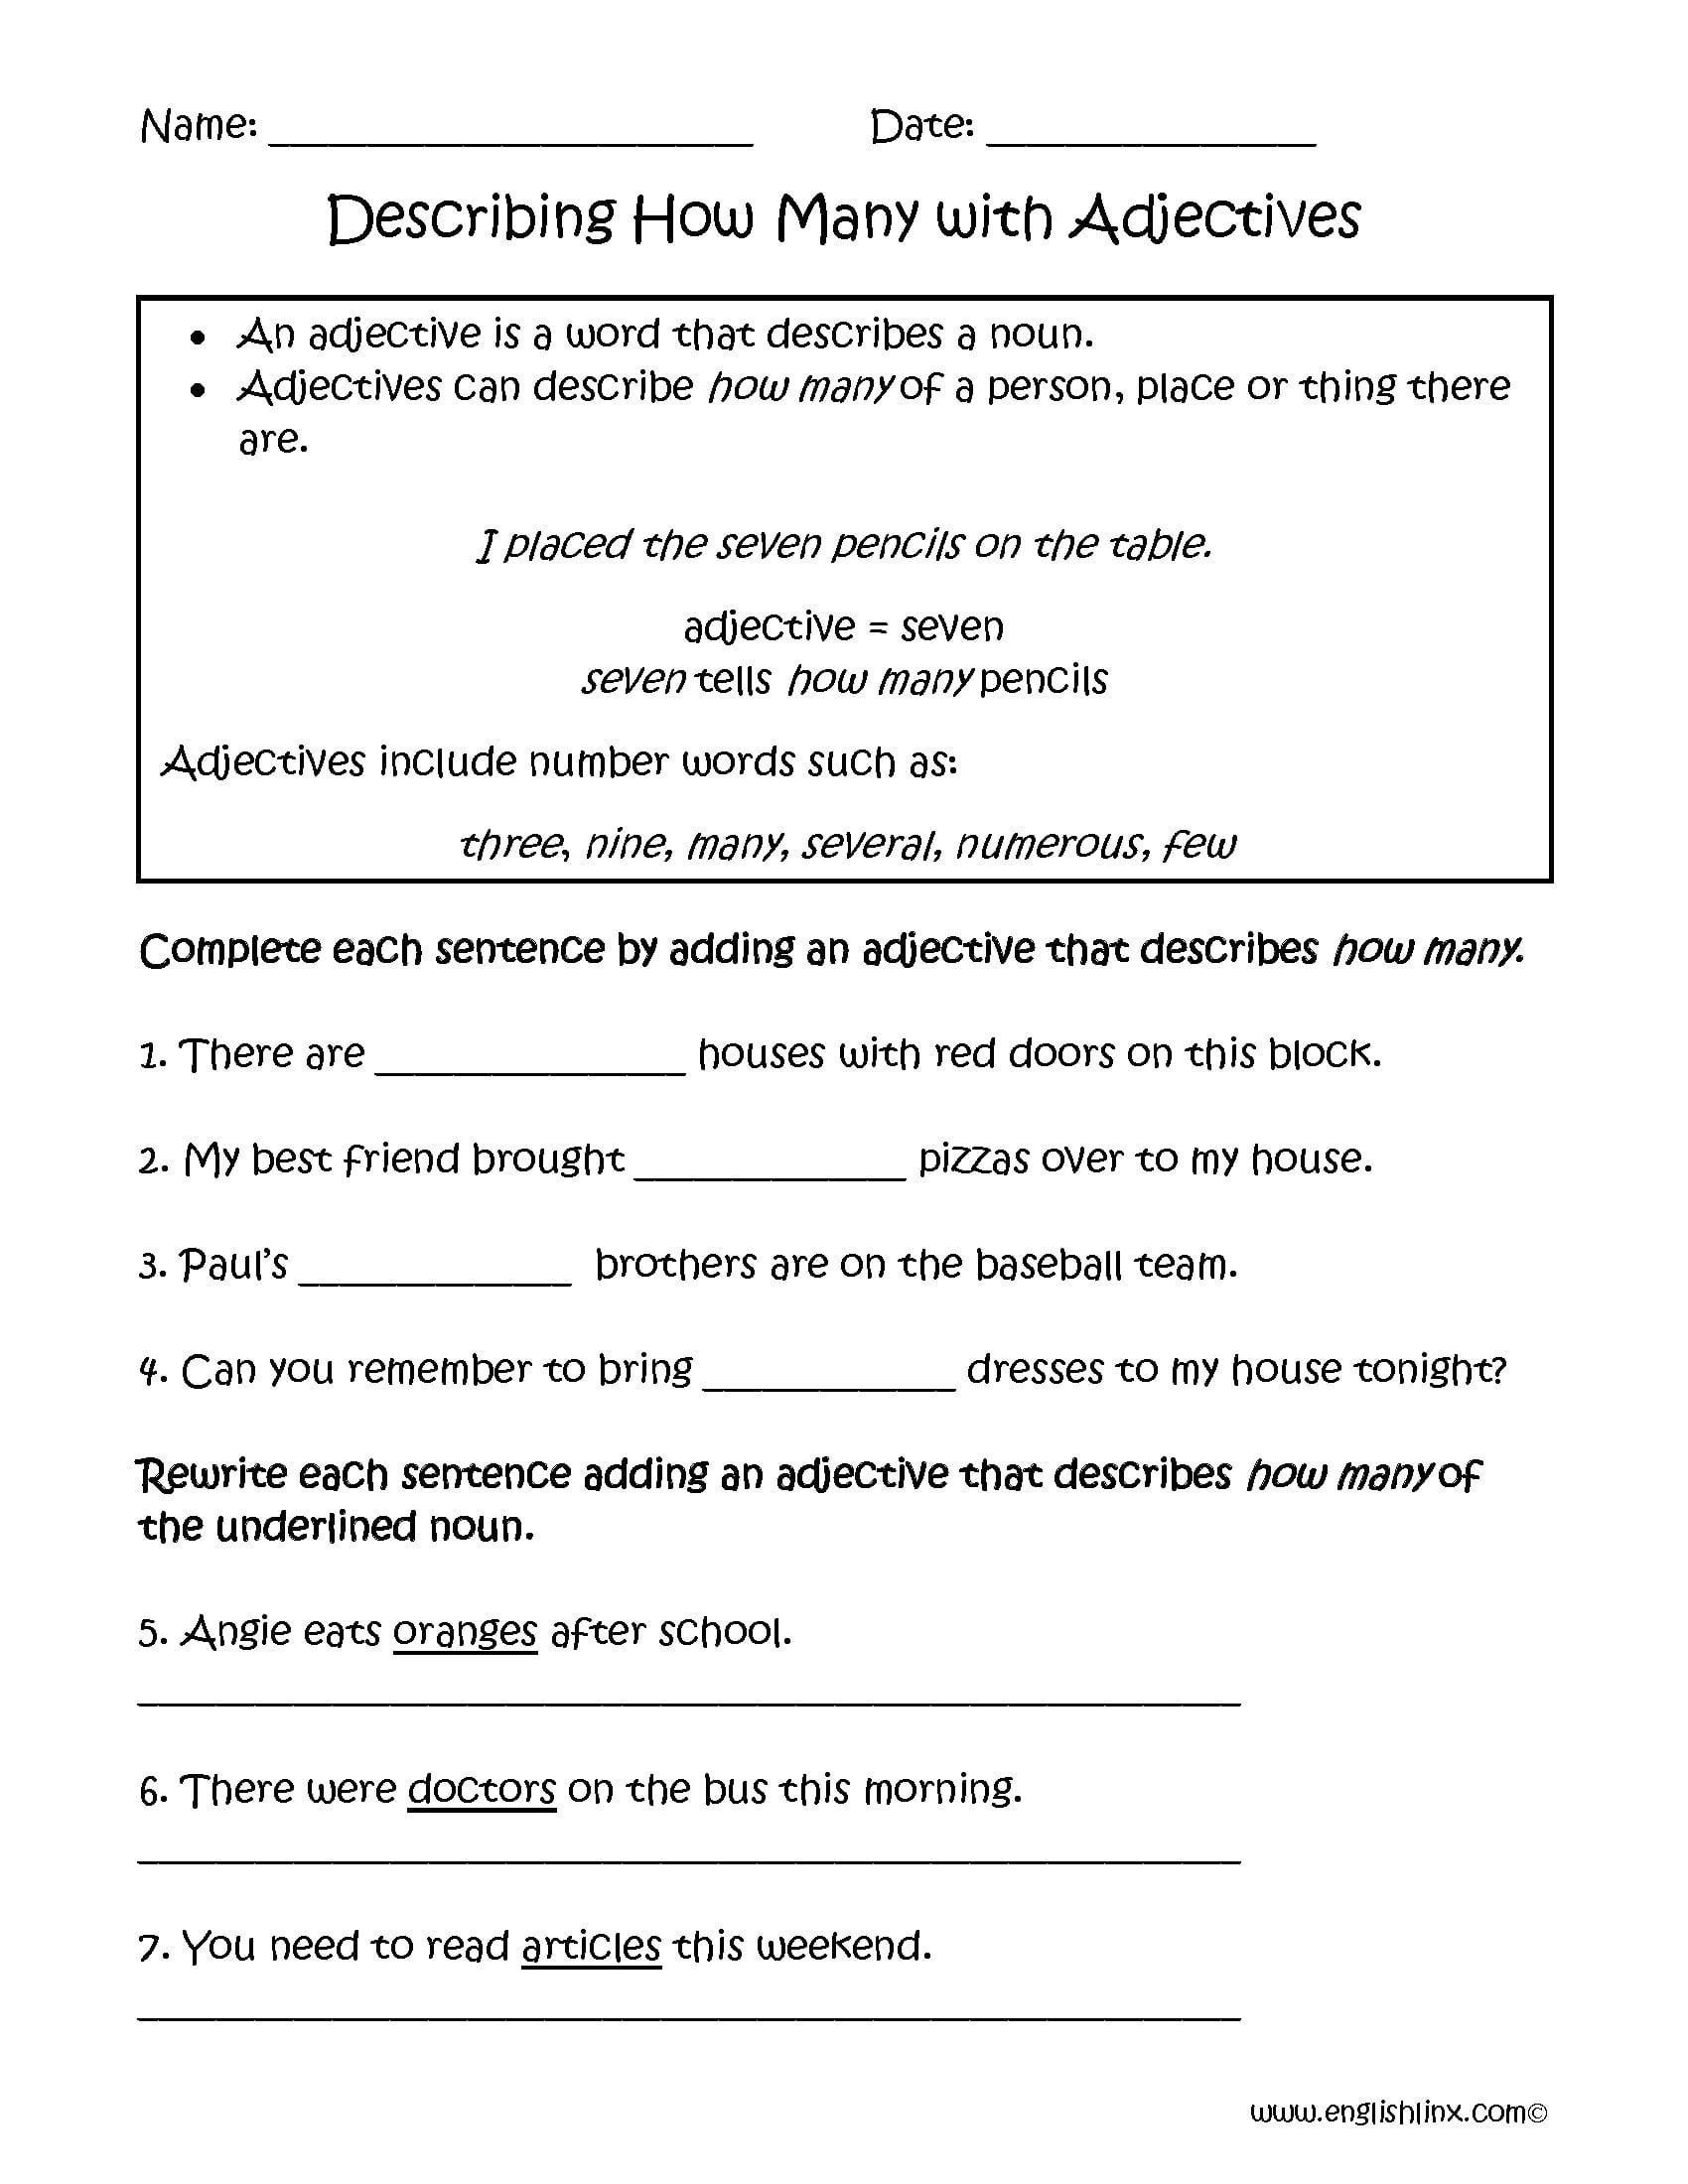 identify-nouns-and-adjectives-worksheets-db-excel